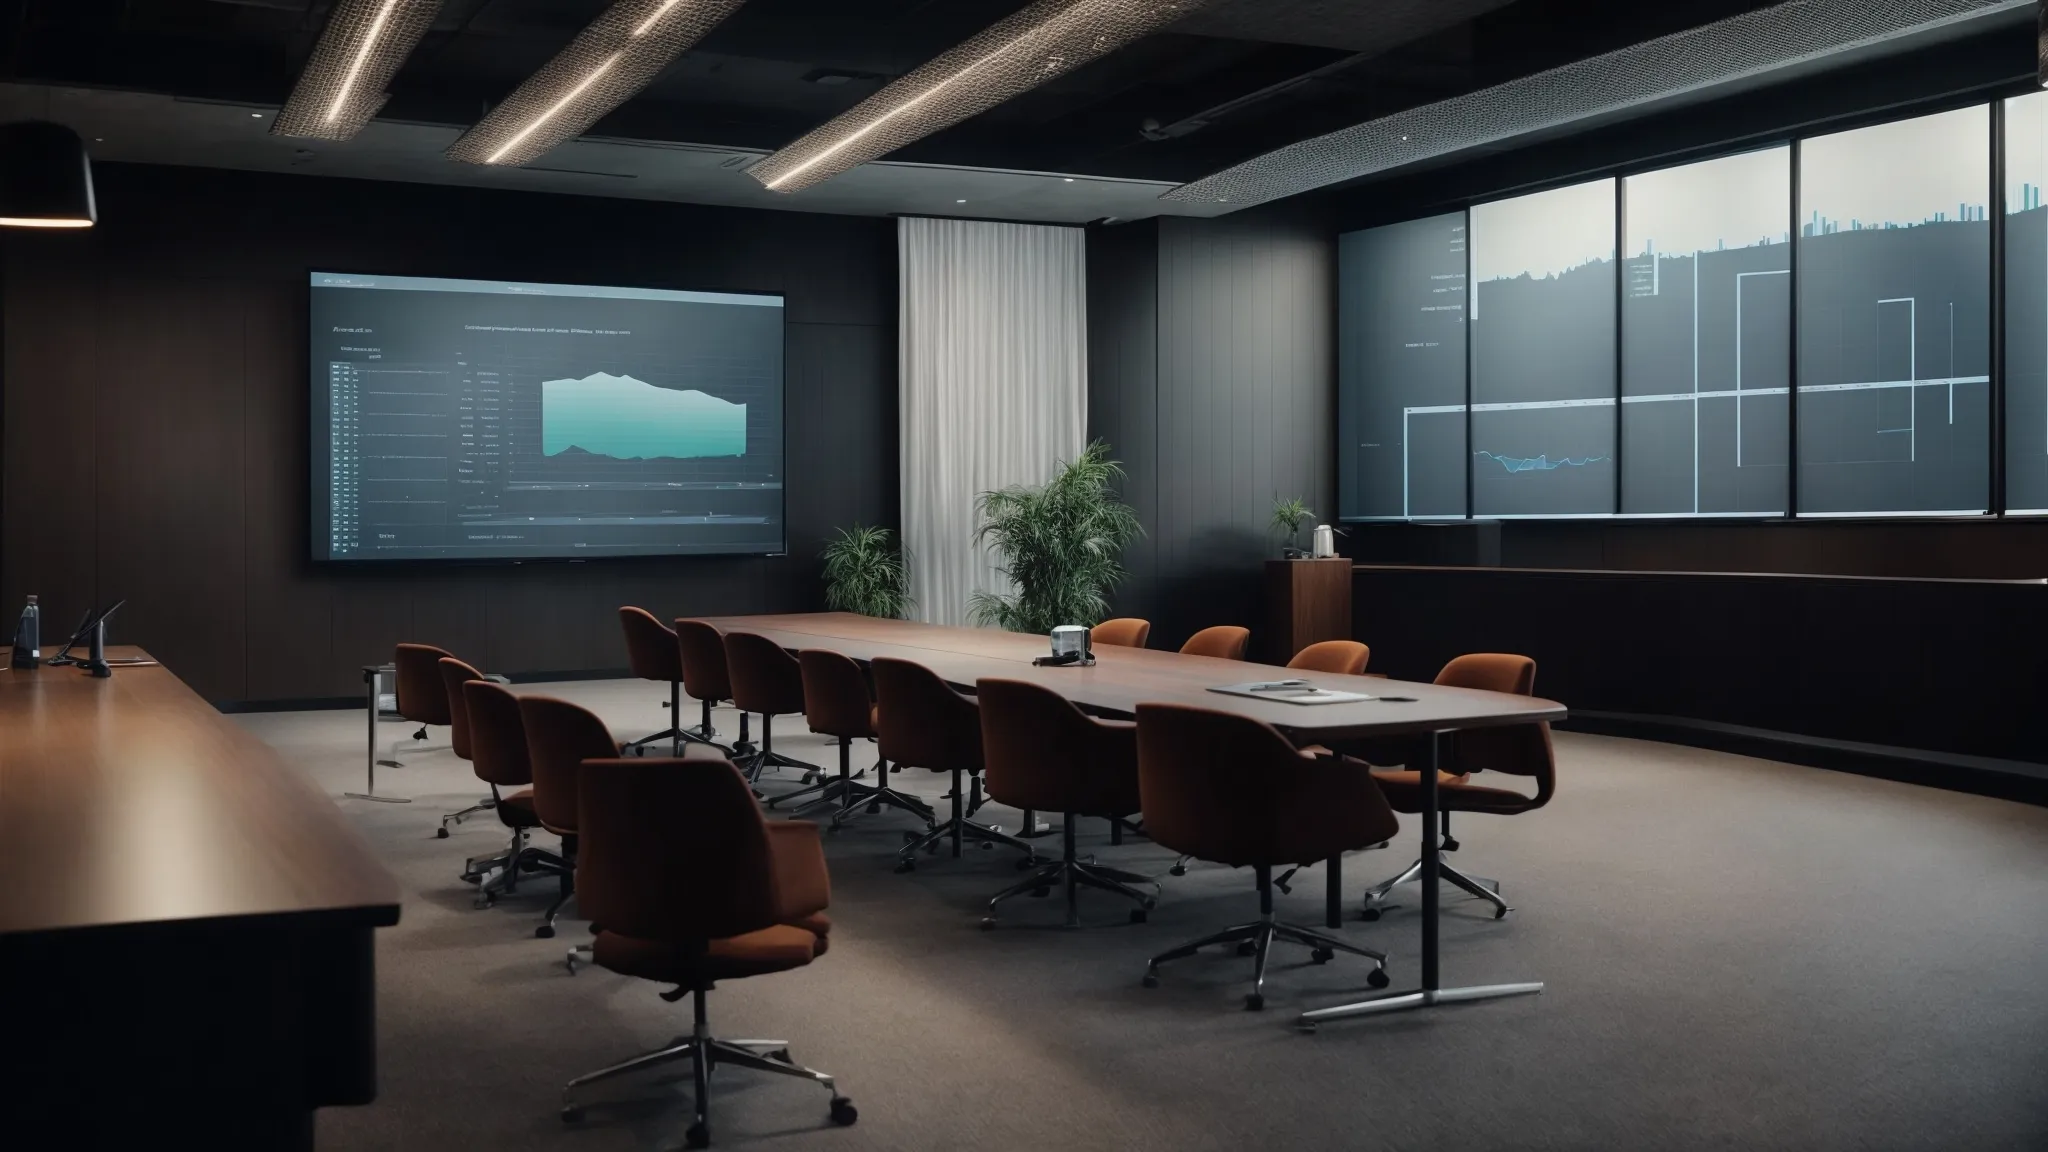 a professional meeting room with a large screen displaying graphs and charts during a software presentation.